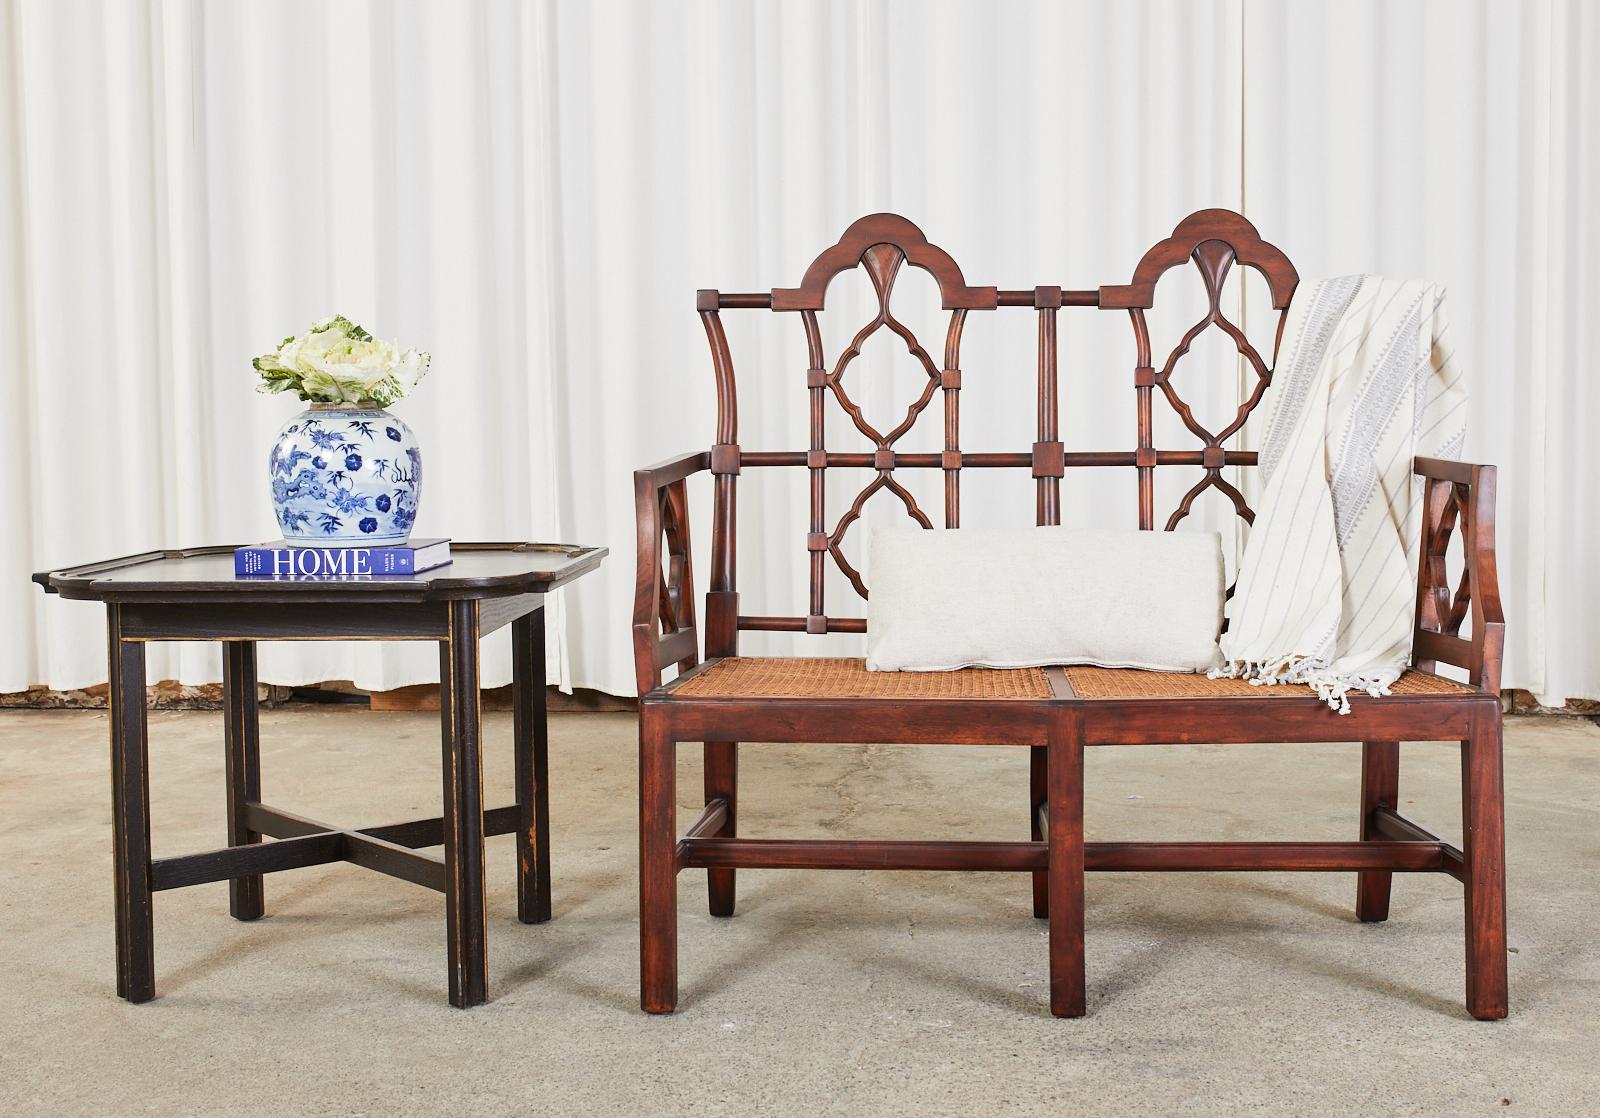 Distinctive mahogany bench seat or settee hand-crafted in the Chinese chippendale taste. The bench features a caned seat and arabesque quatrefoil designs on the back and sides. The settee has a rich finish that showcases the beautiful wood grain